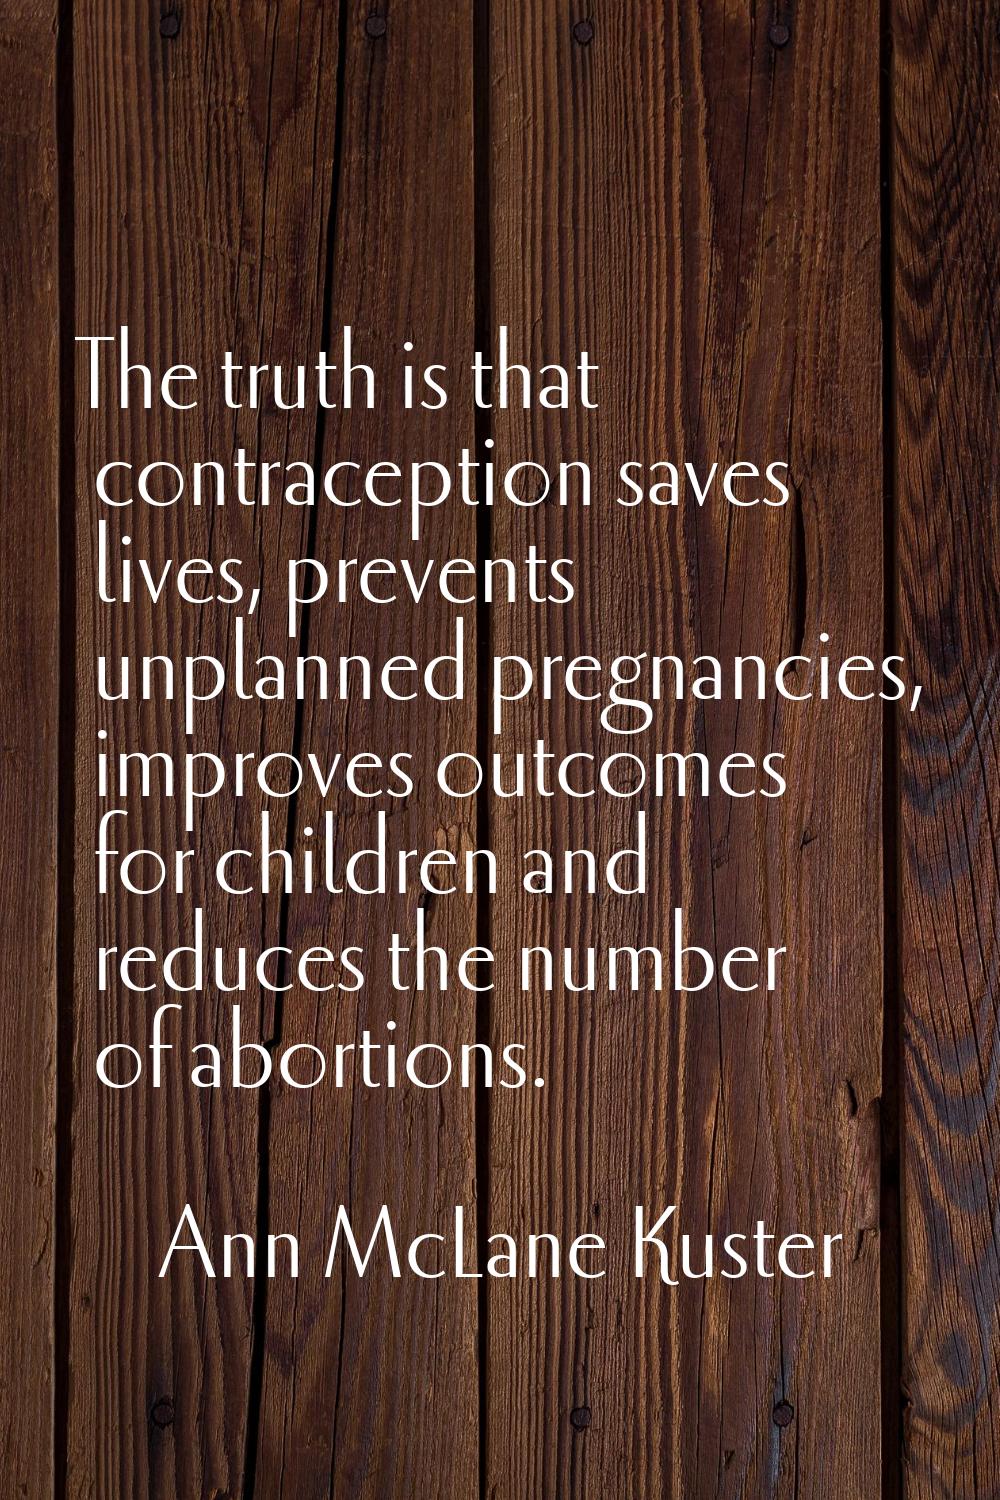 The truth is that contraception saves lives, prevents unplanned pregnancies, improves outcomes for 